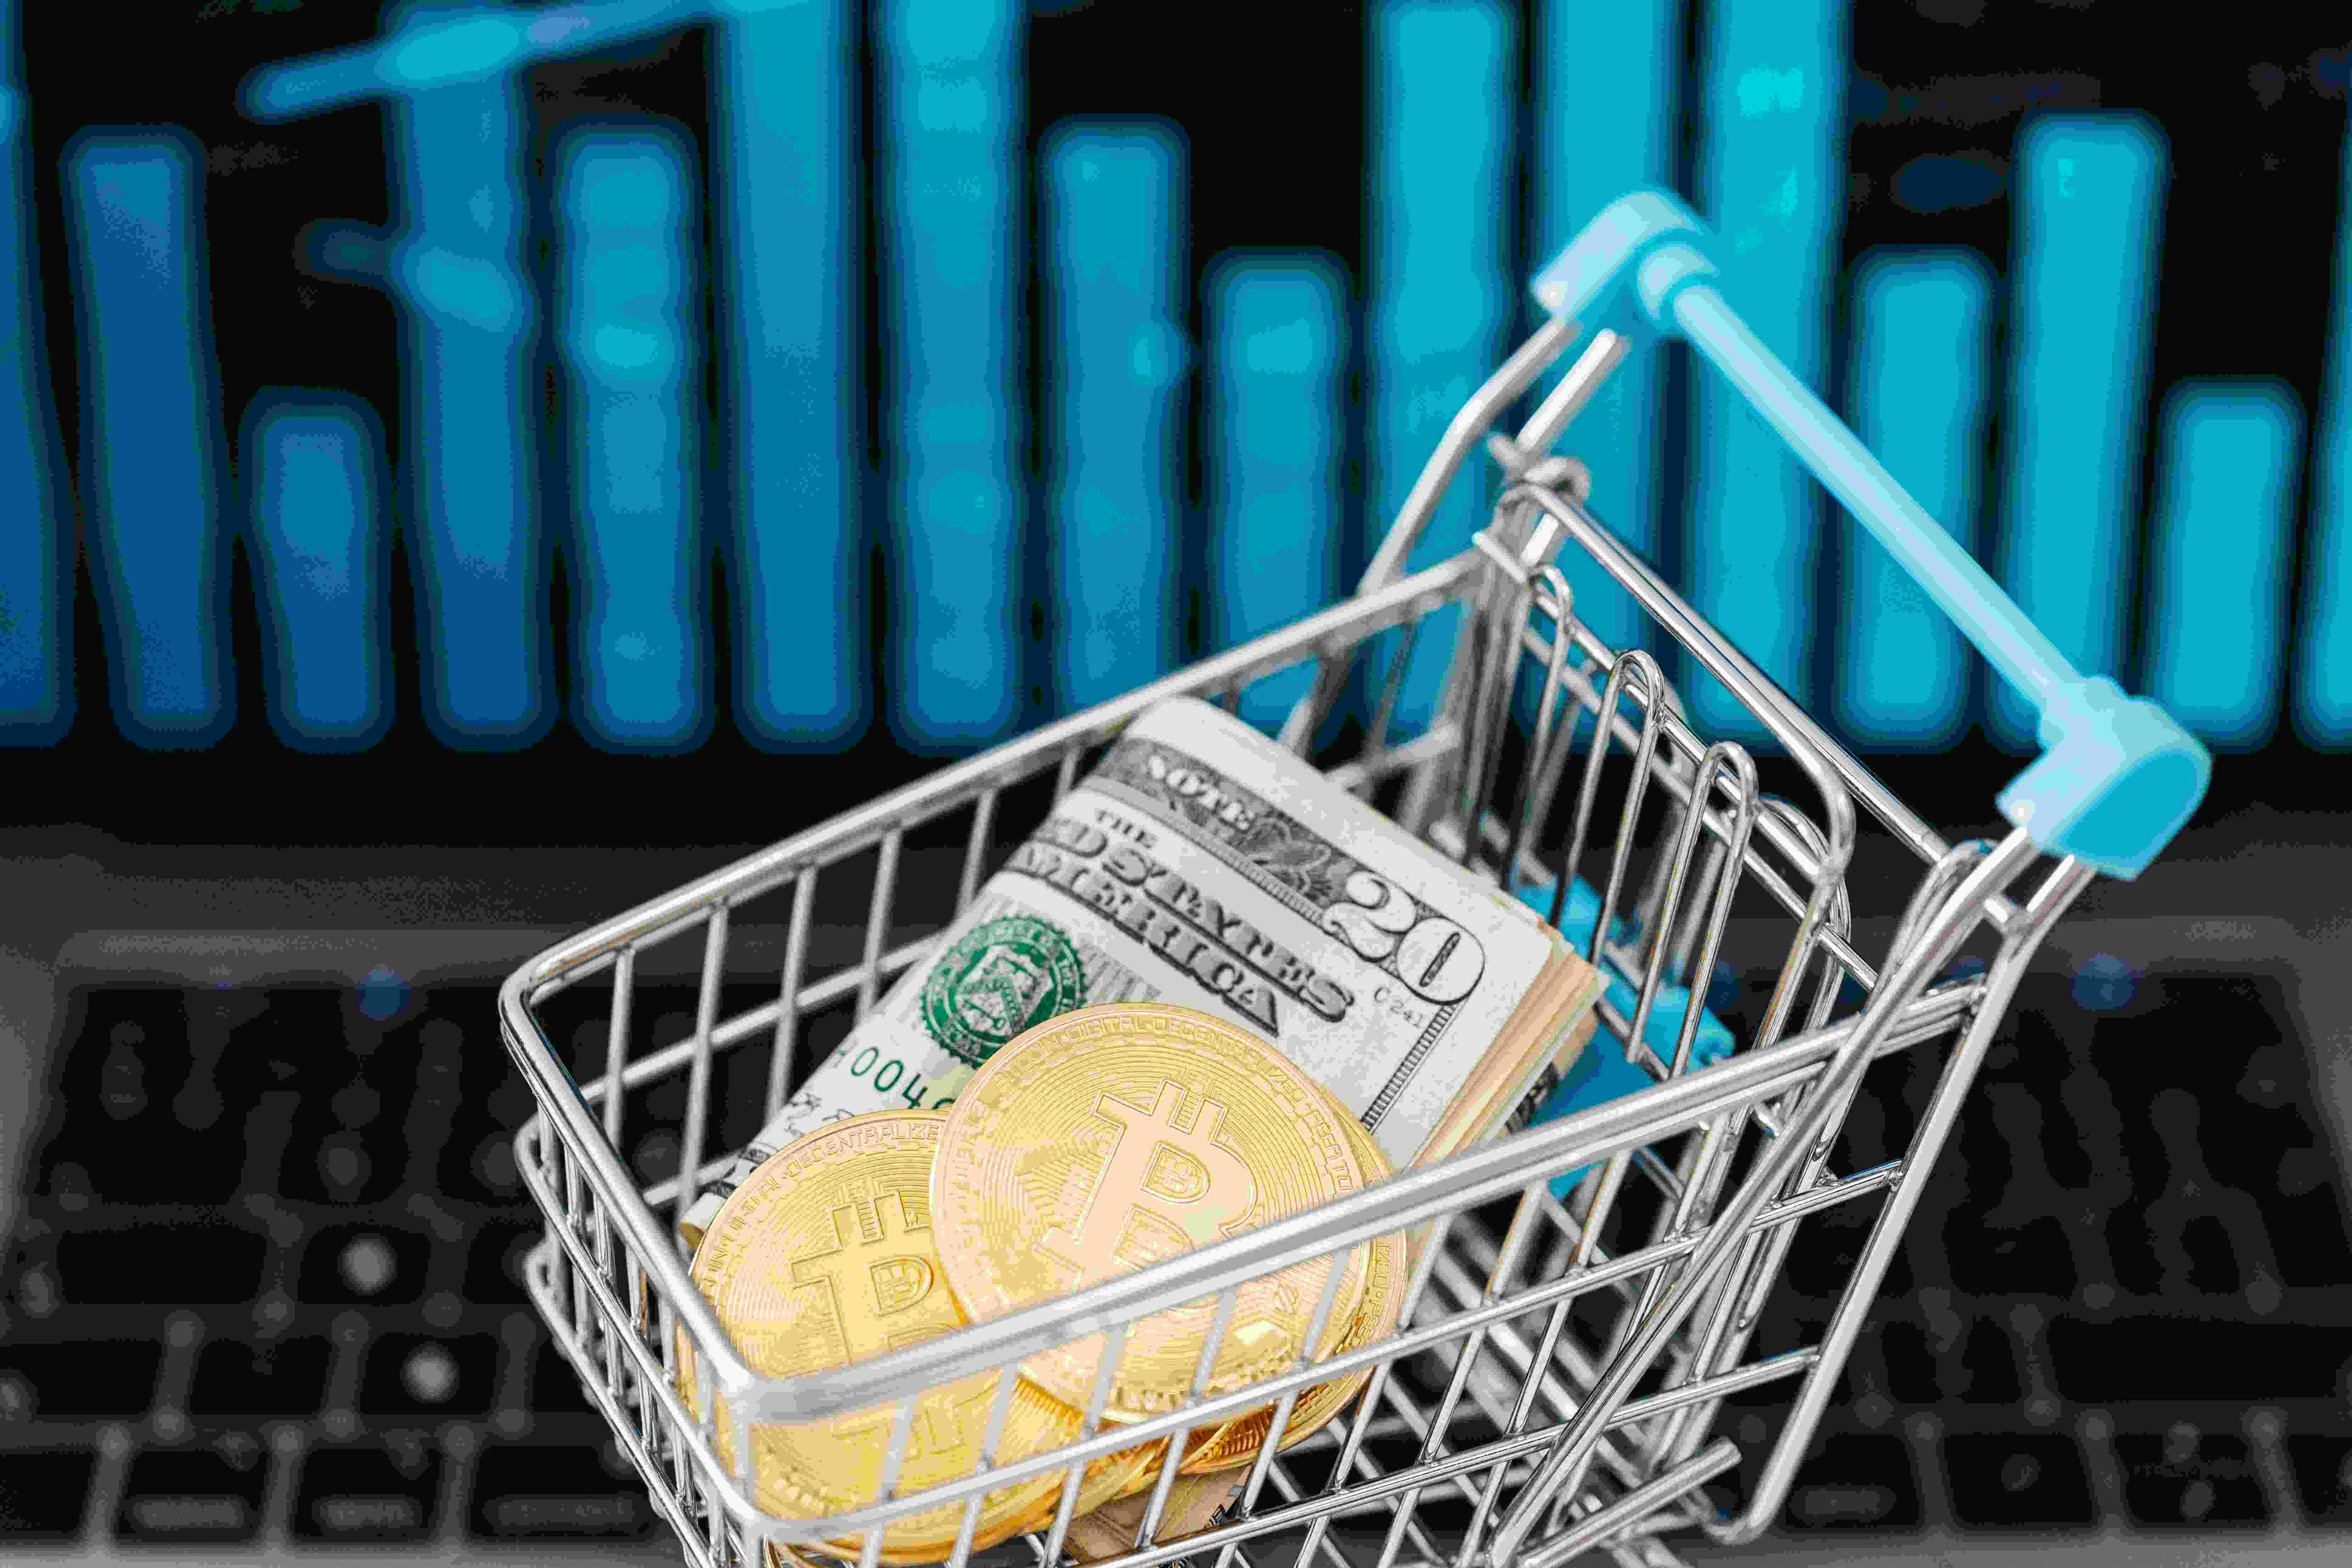 A shopping cart with a couple bills folded up with the twenty showing and two golden coins with the Bitcoin logo all inside it.